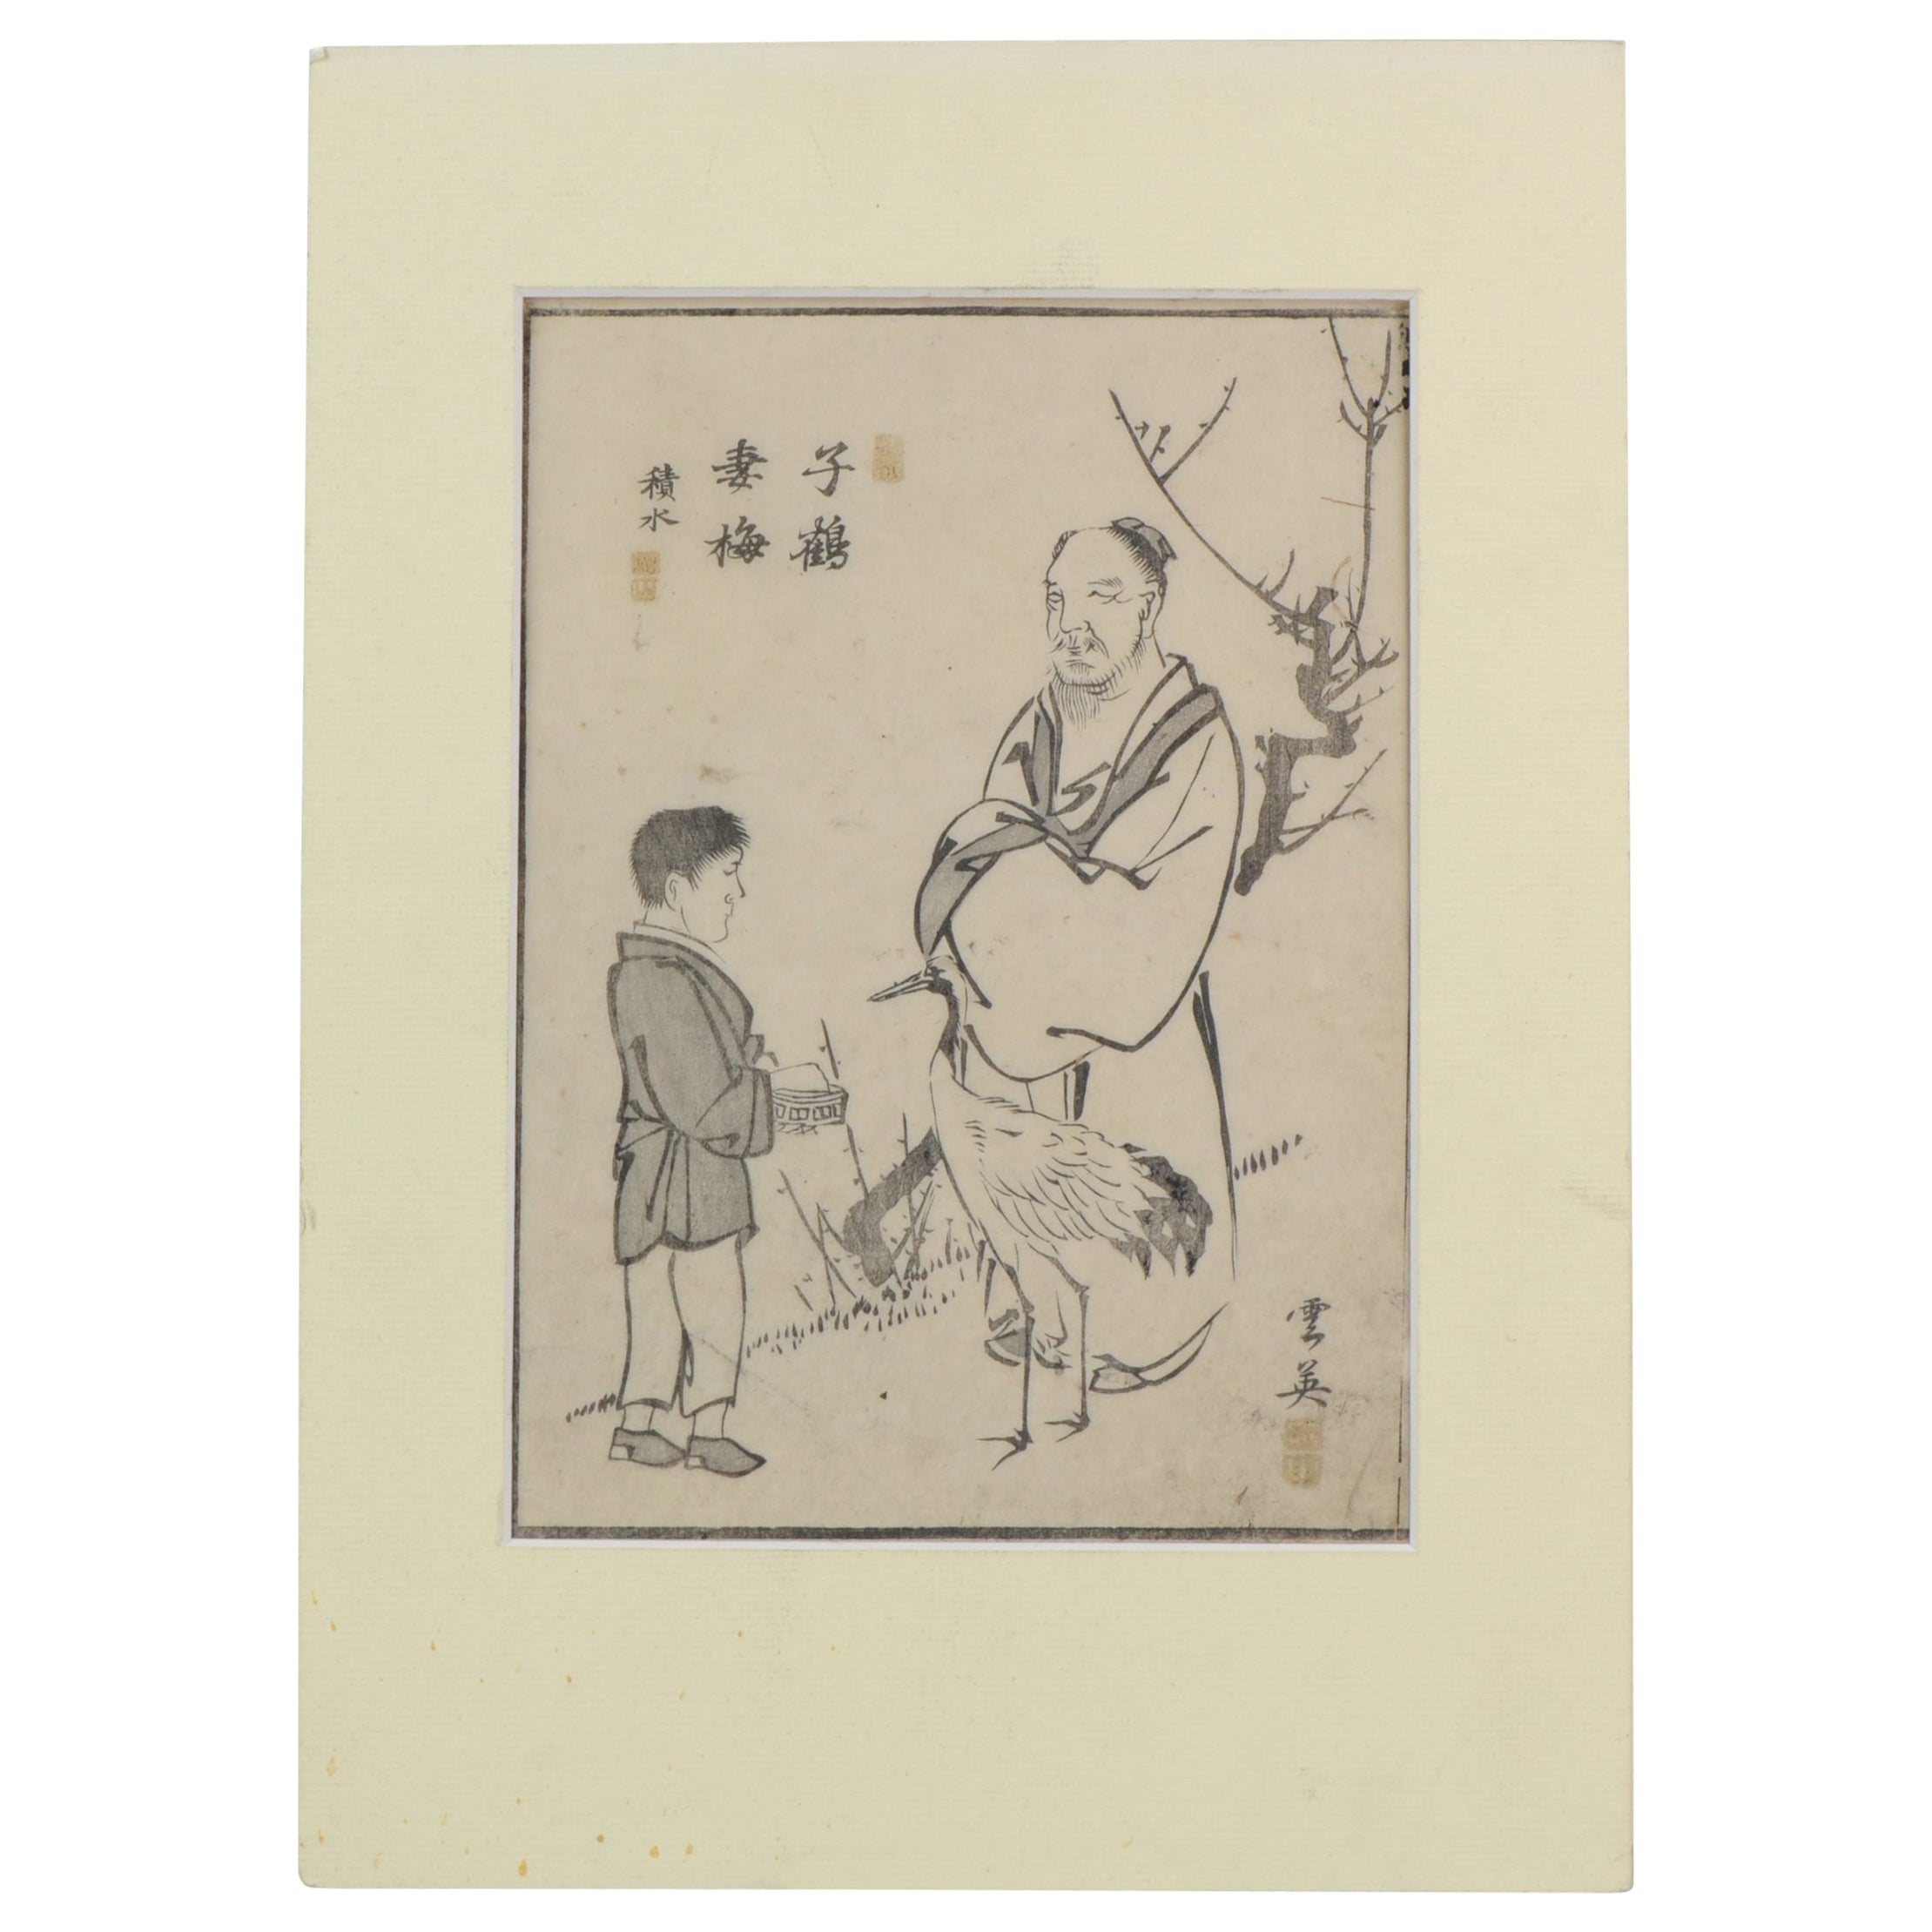 Lovely Ink Drawing Painting of Wang Xizhi China Artist, 19/20th Century